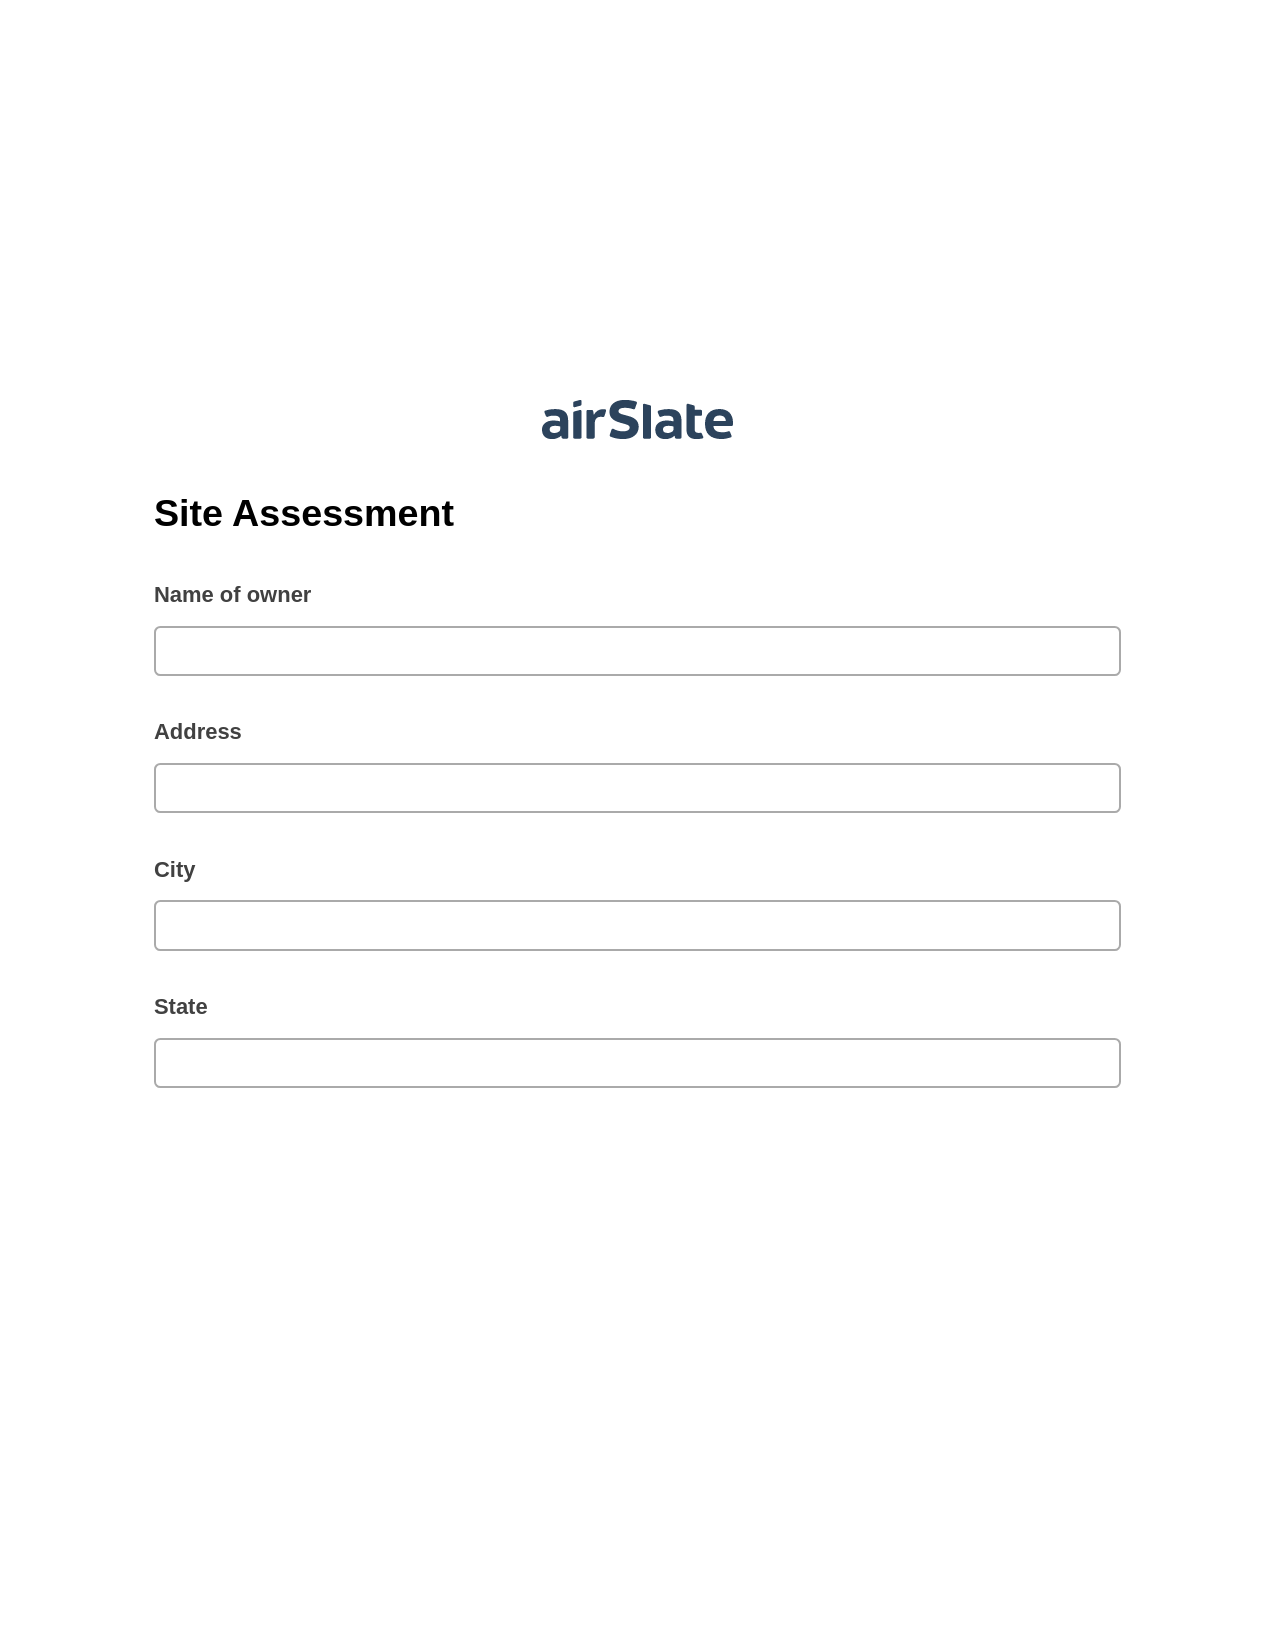 Site Assessment Pre-fill from Google Sheet Dropdown Options Bot, Assign Roles to Recipients Bot, Export to NetSuite Record Bot